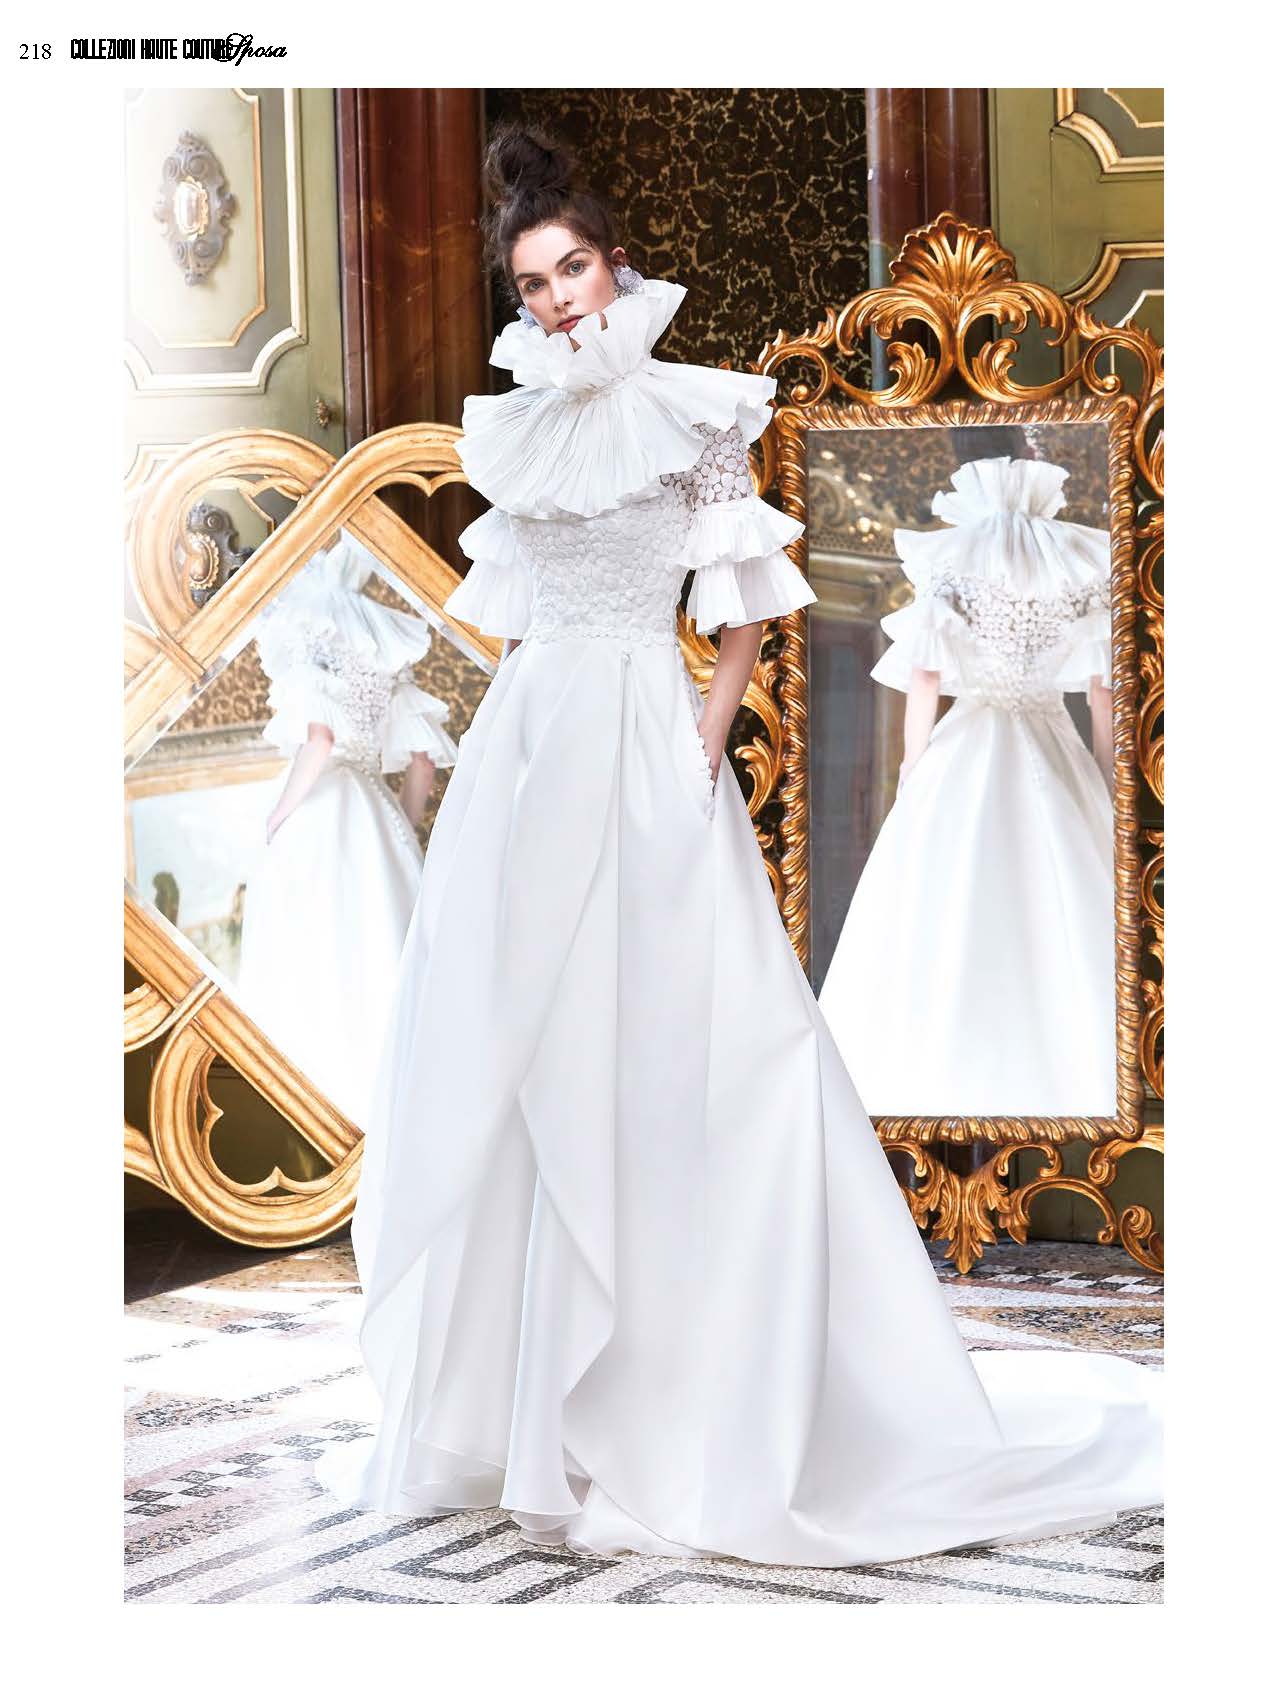 Pages from _Haute Couture&Sposa167_March 18_Page_1